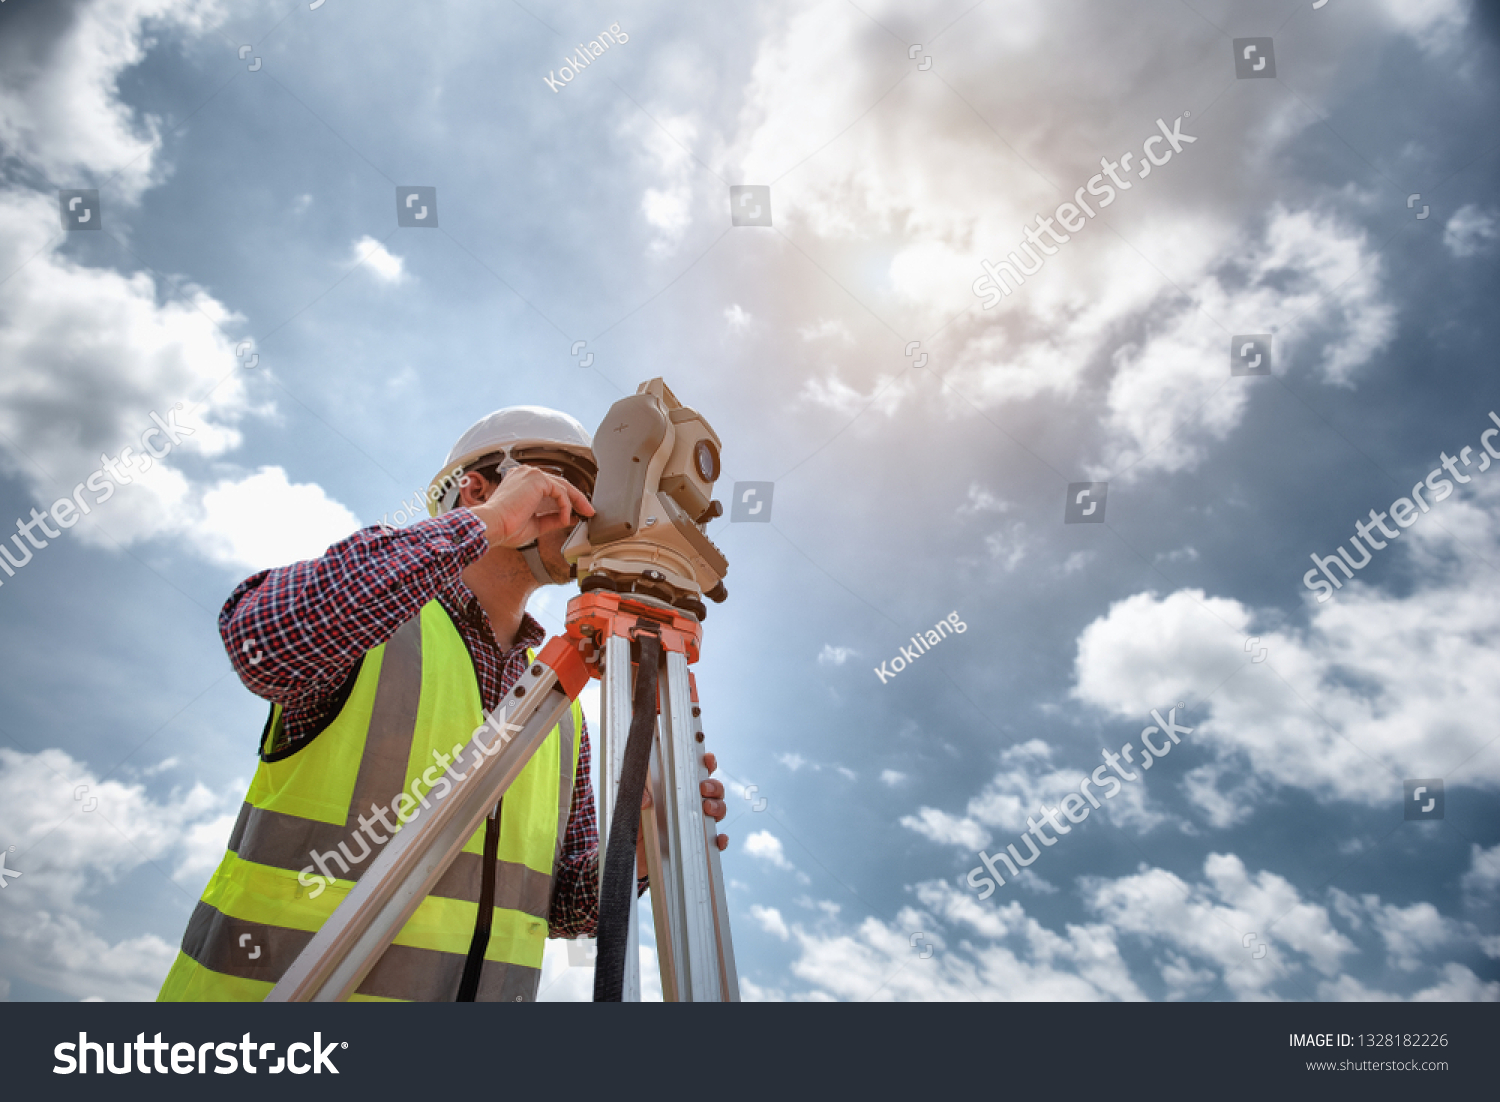 Surveyor equipment. Surveyor’s telescope at construction site or Surveying for making contour plans are a graphical representation of the lay of the land before startup construction work  #1328182226